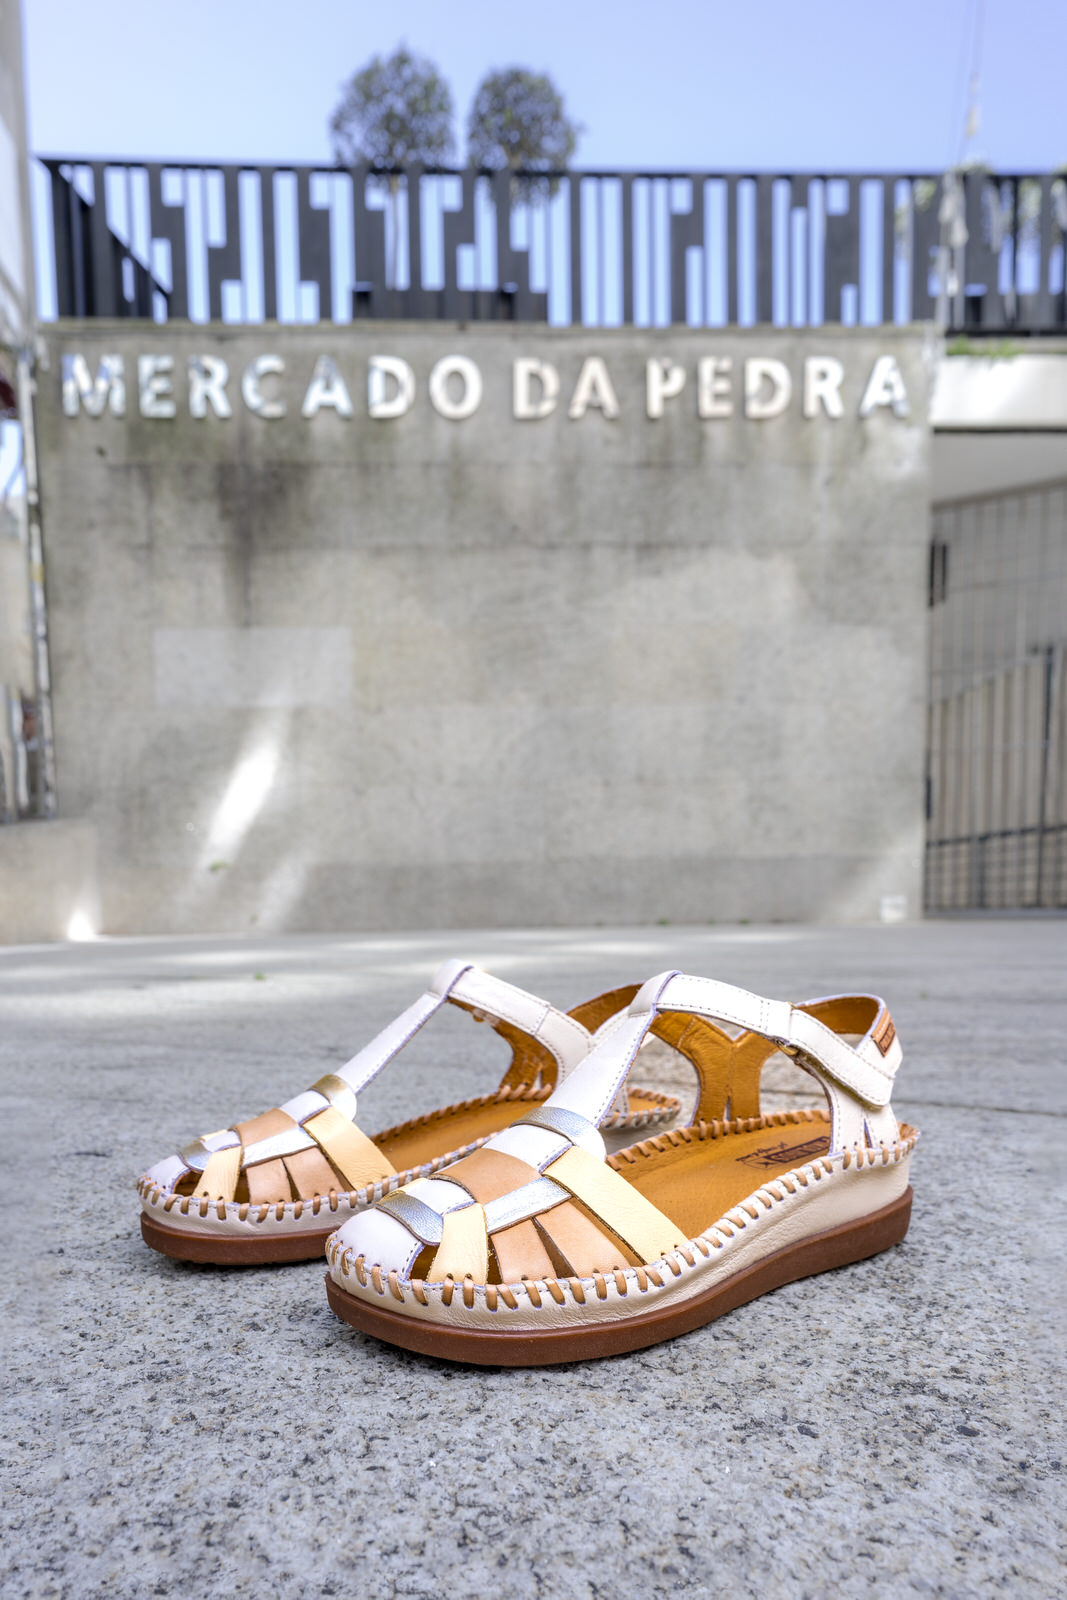 Image of a pair of women's Pikolinos sandals on the ground and, in the background, you can see the Mercado de la Piedra.